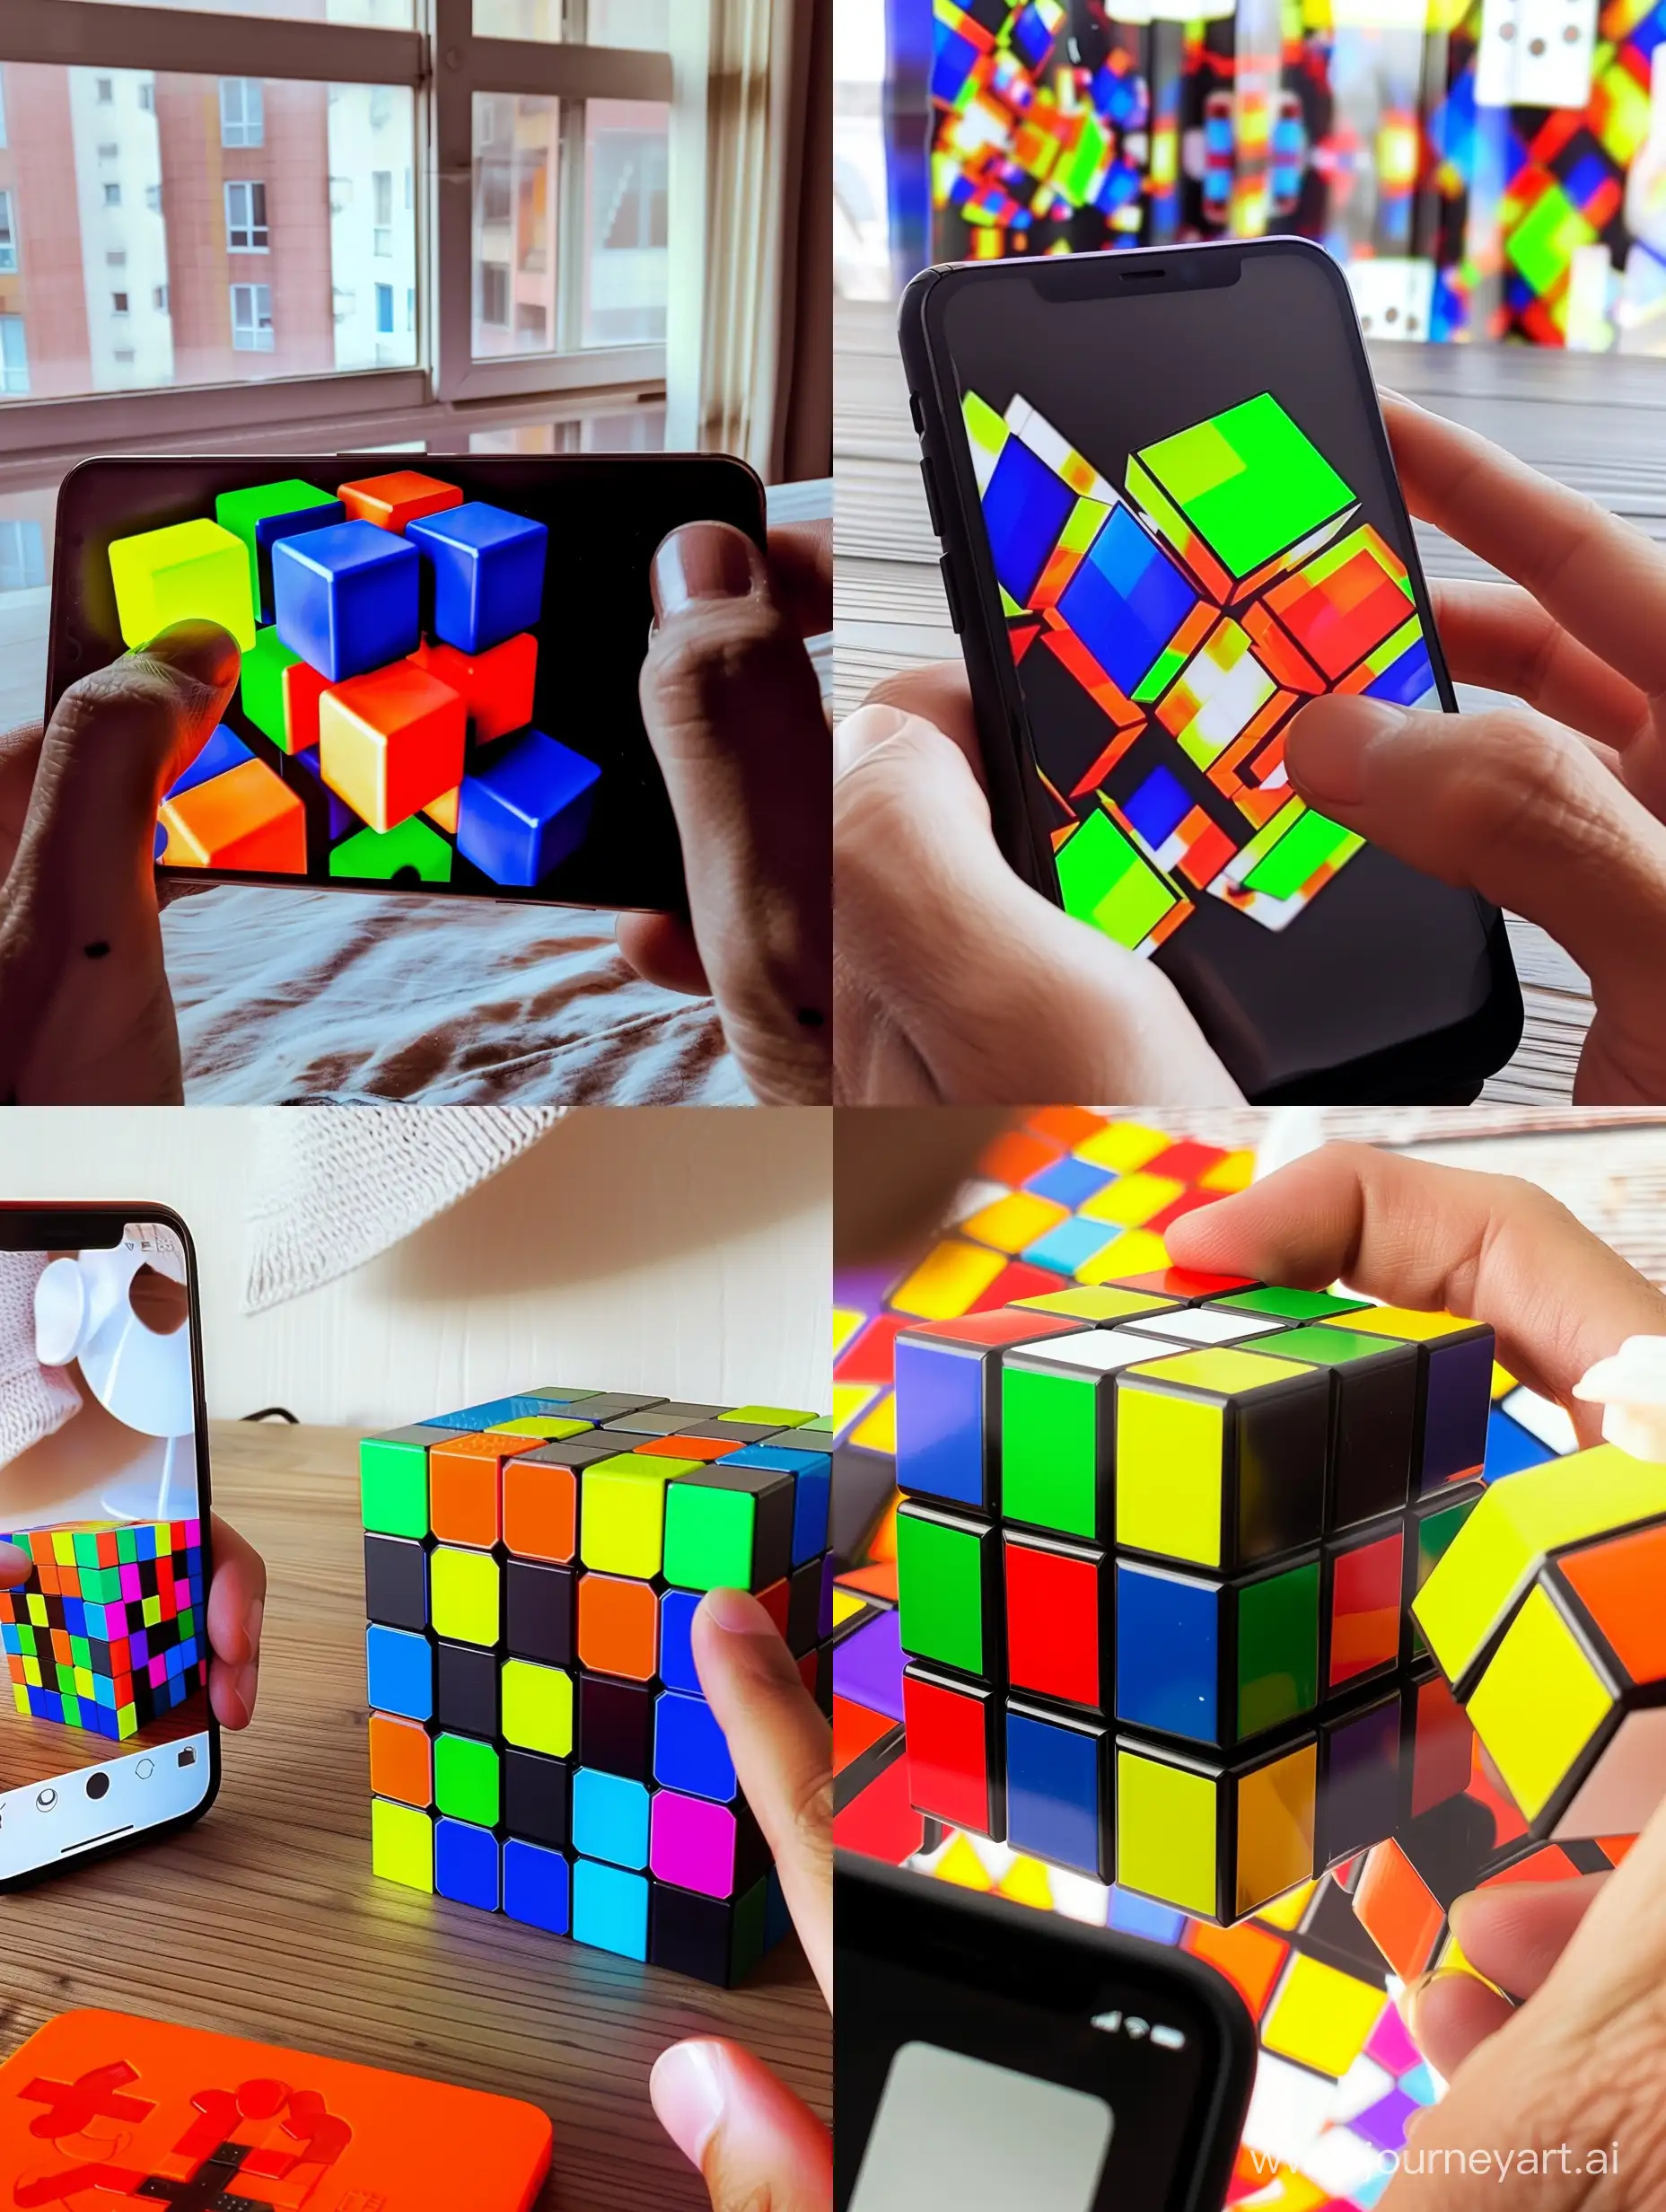 Solving-Rubiks-Cube-Puzzle-in-Vibrant-Daylight